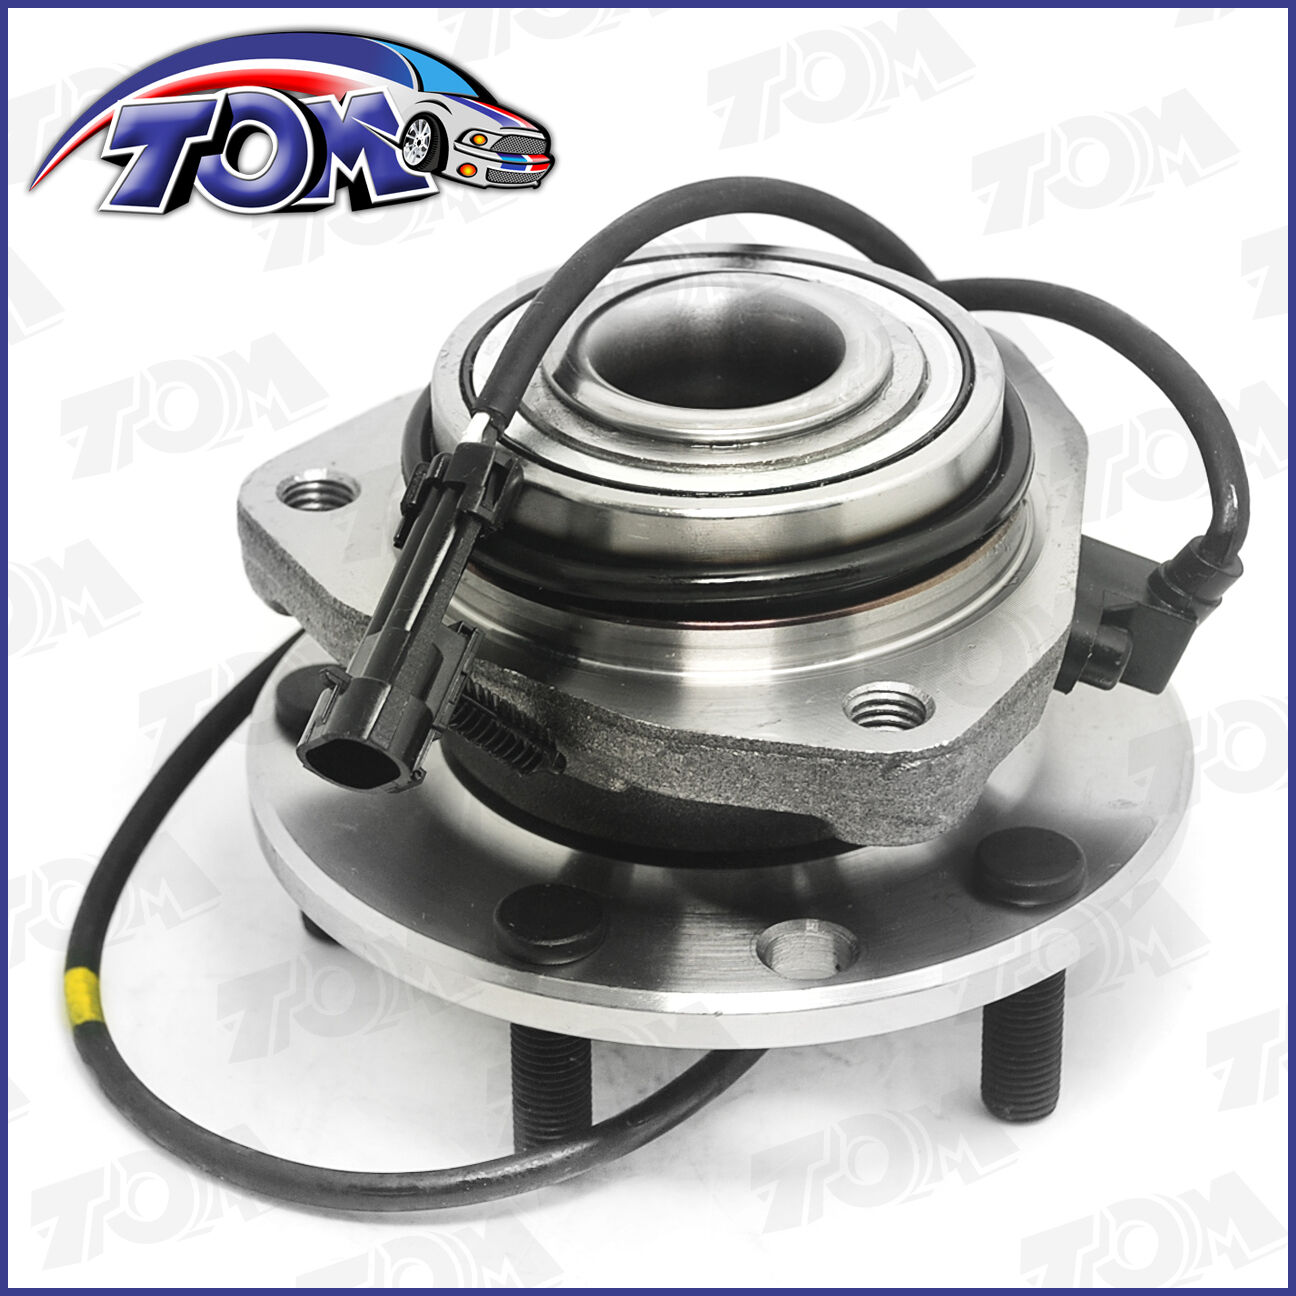 Front Wheel Hub & Bearing Assembly For Chevy Blazer S10 Gmc Jimmy 4Wd 4X4 W/ ABS